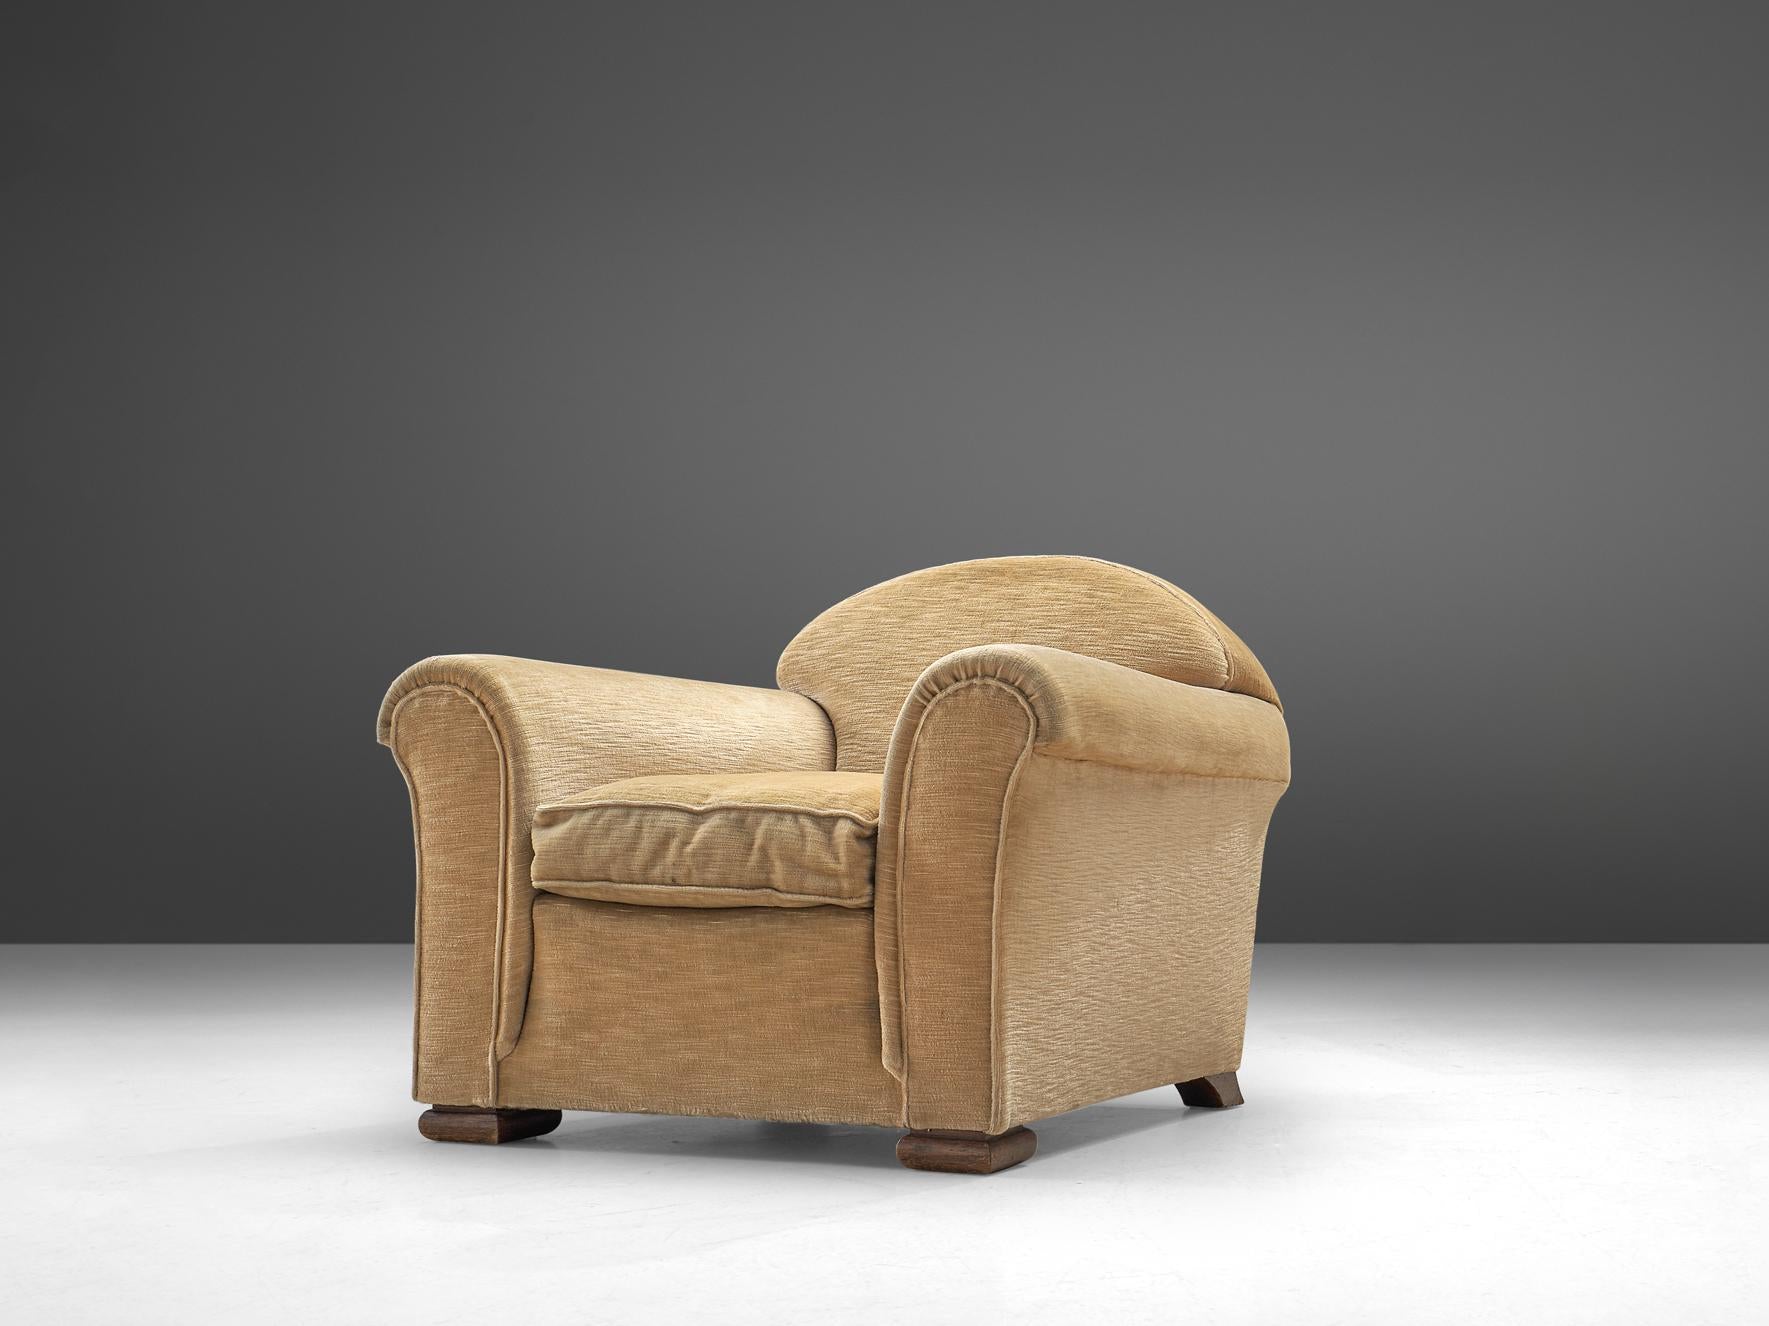 French Art Deco Lounge Chair in Beige Upholstery